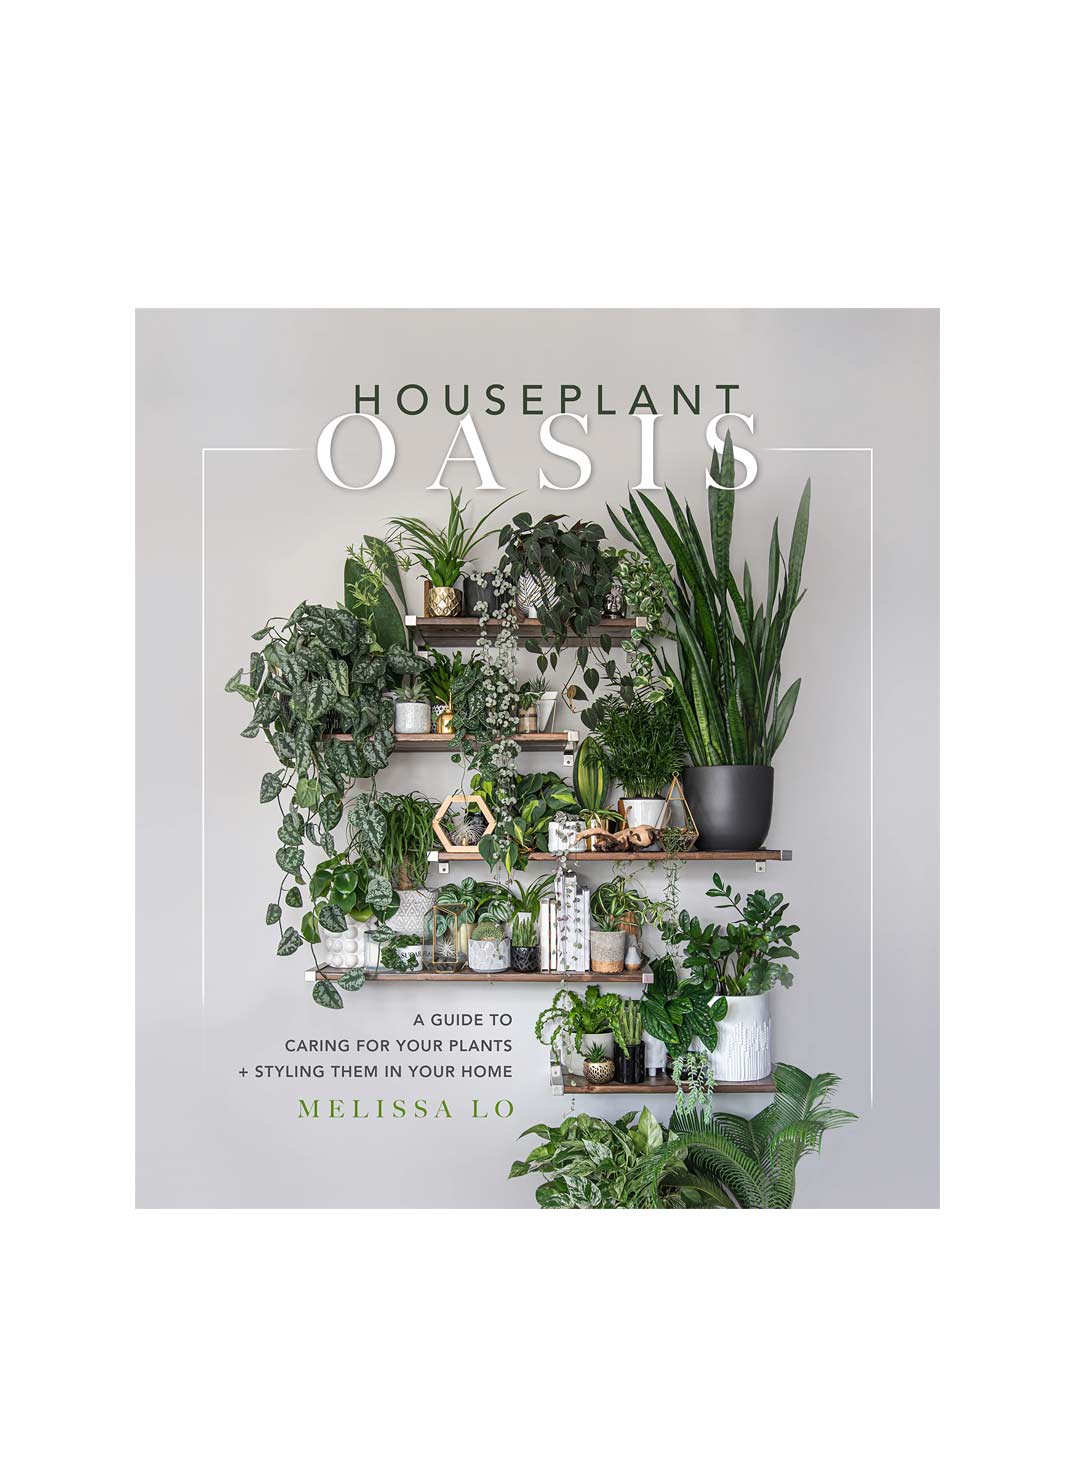 Houseplant Oasis: A Guide to Caring for Your Plants + Styling Them in Your Home